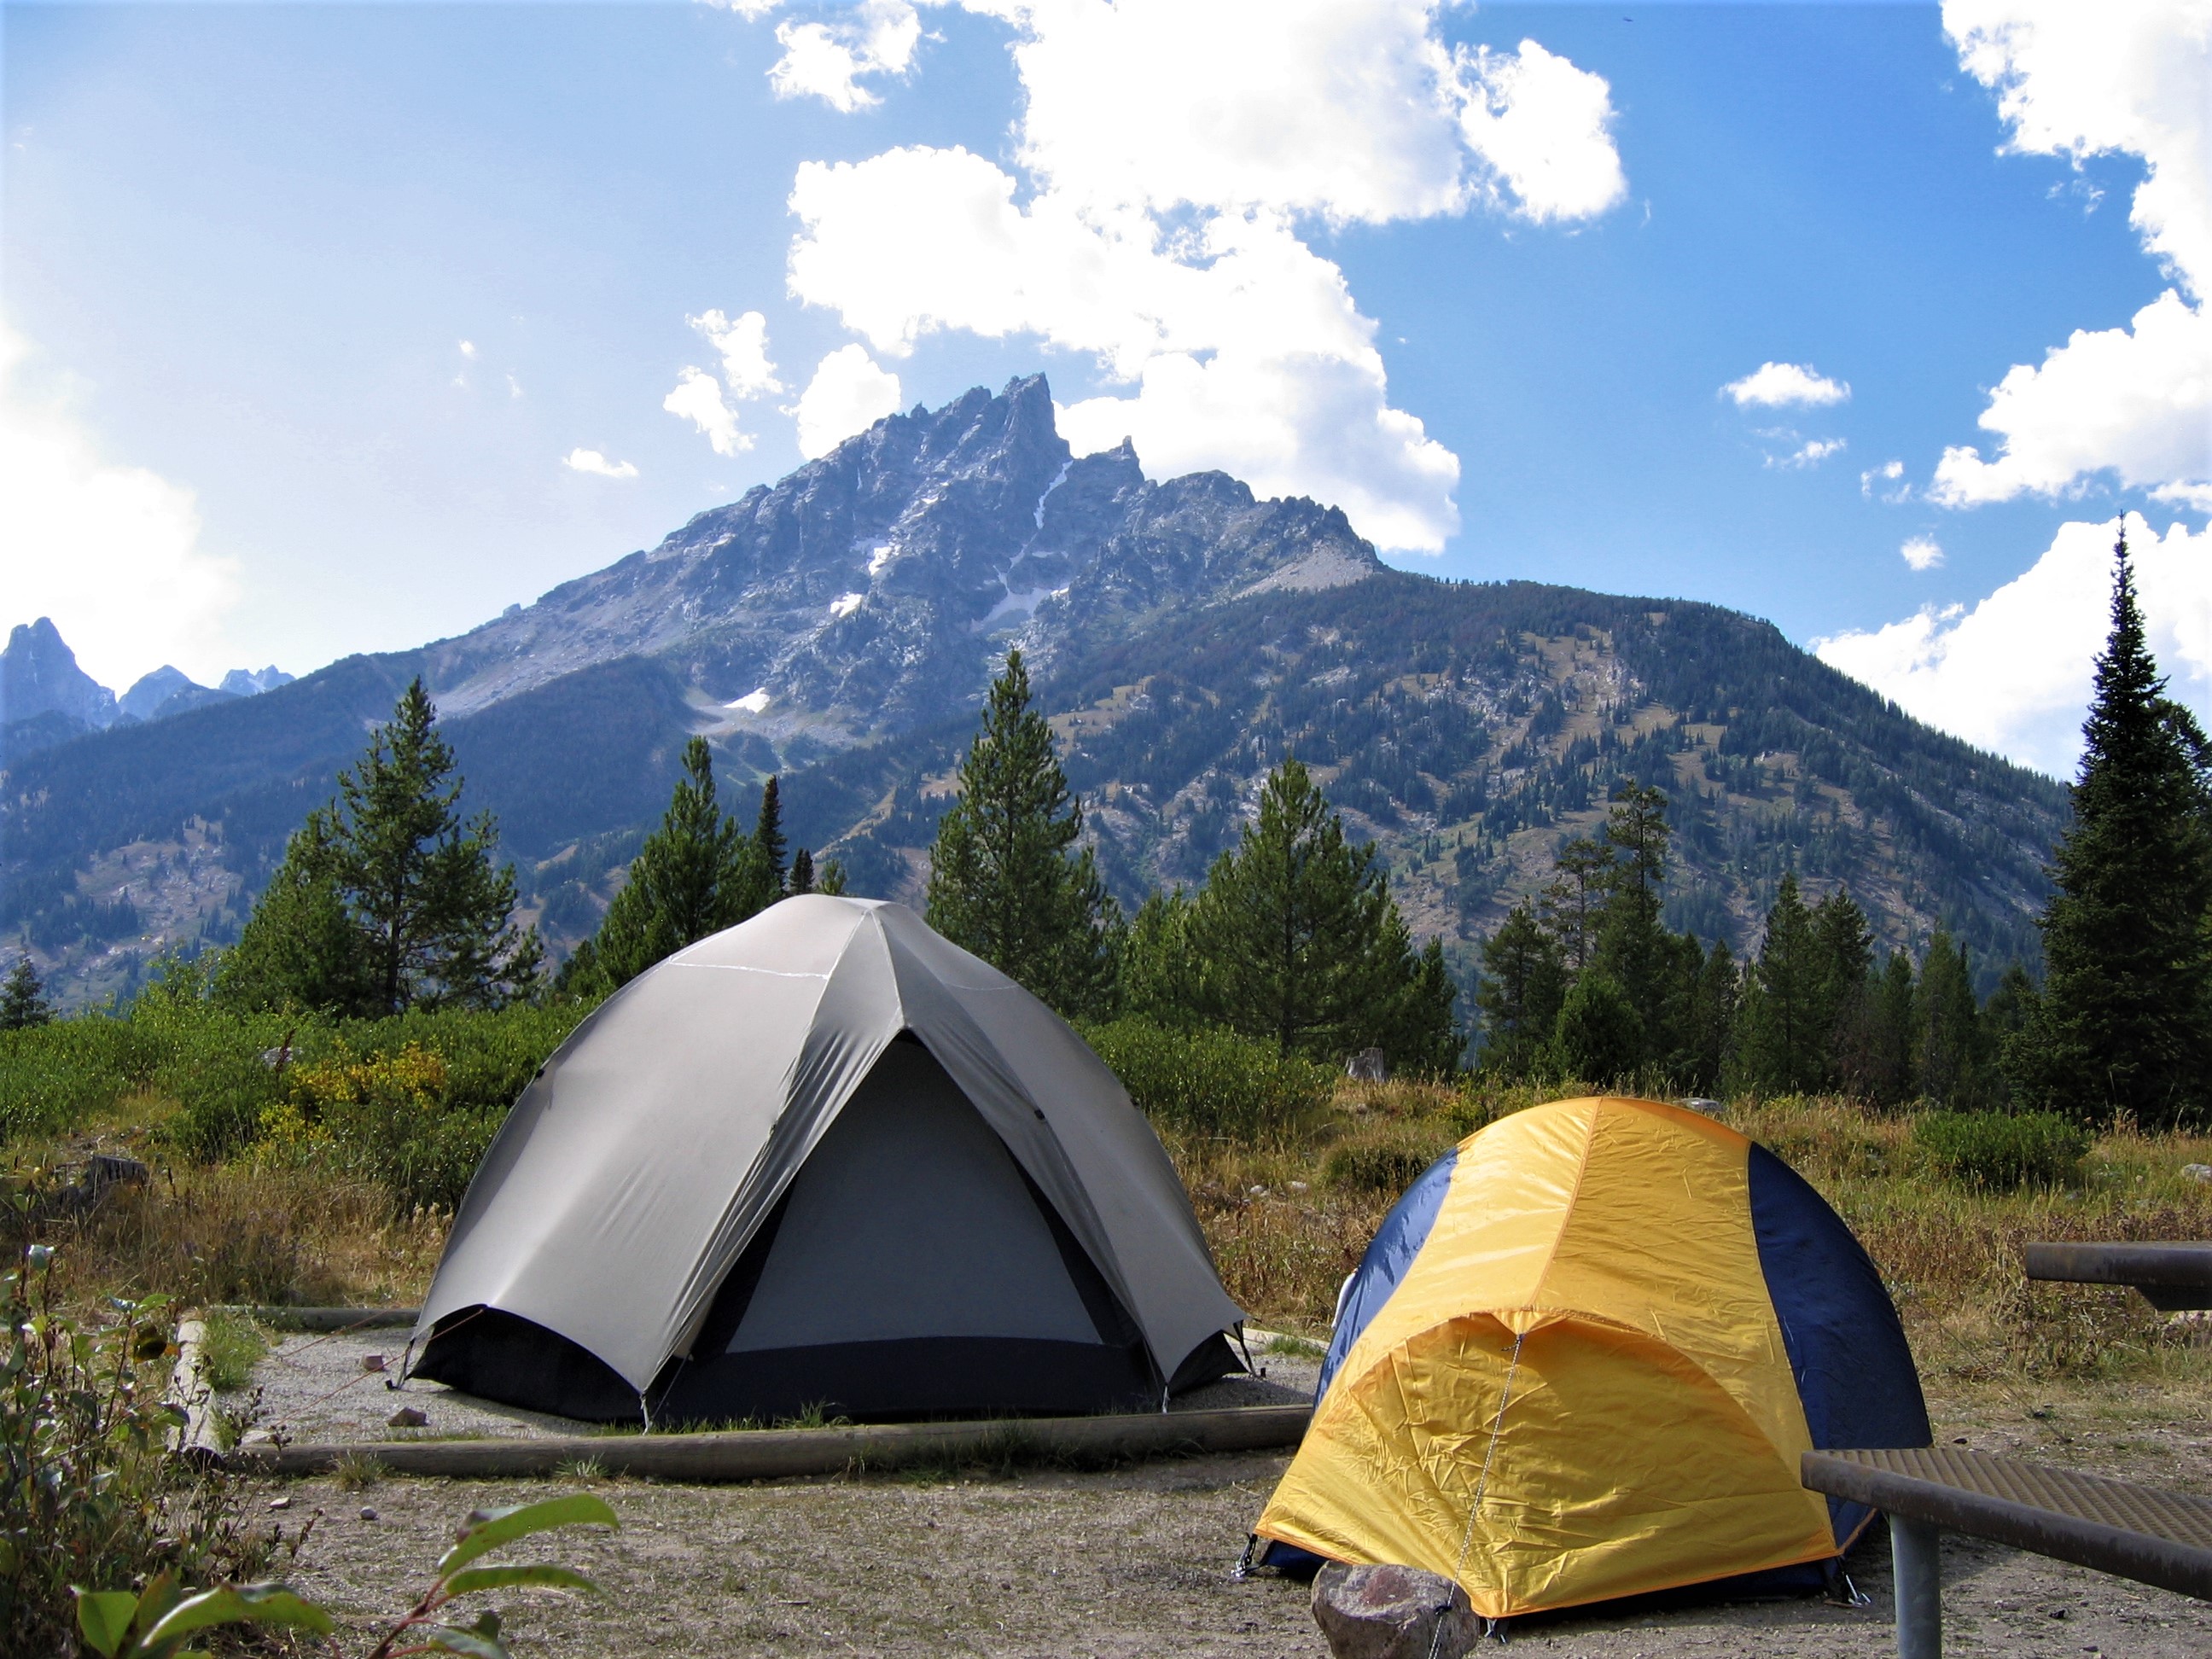 Camping In National Parks In The US - Exploring The Great Outdoors